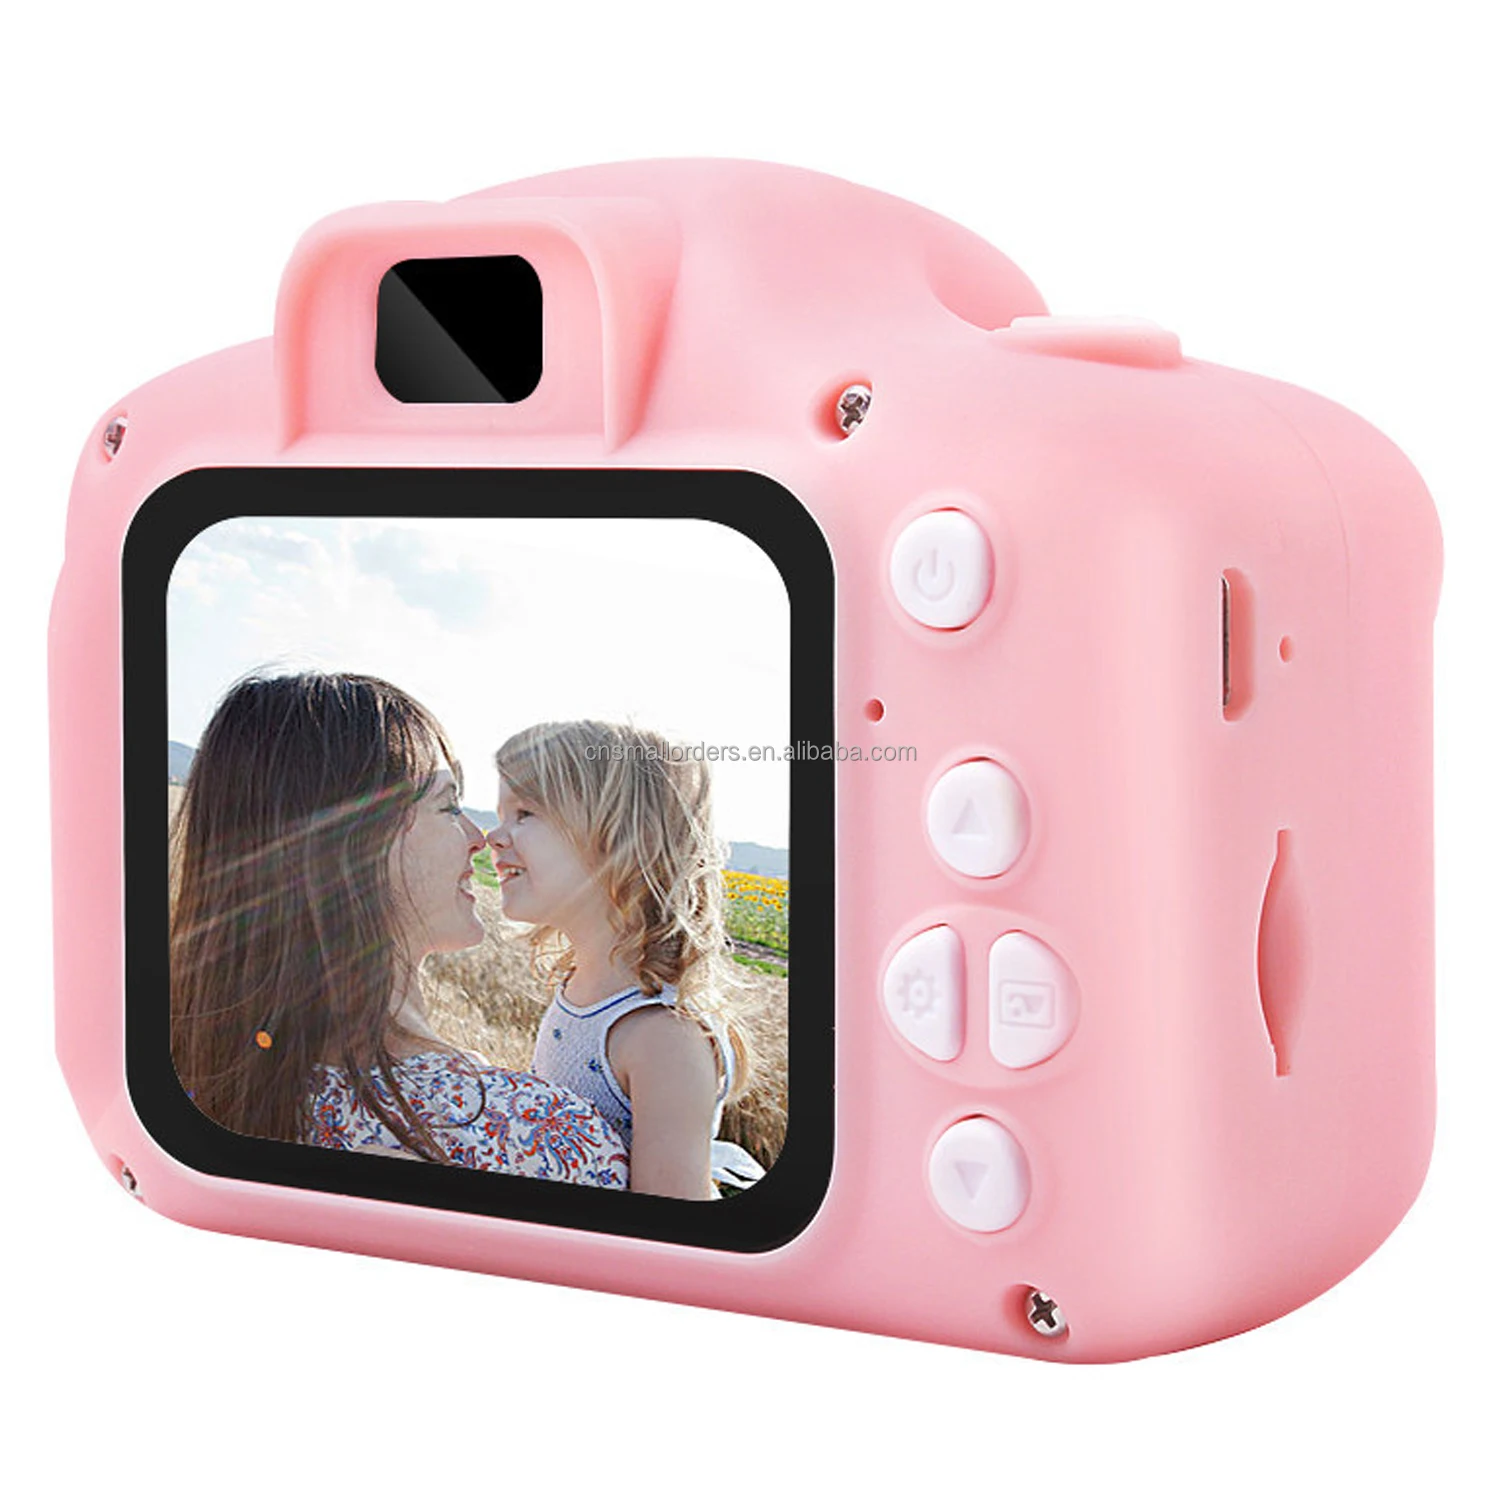 SmallOrders Promotional Products Business Gift Gifts Items Giveaways Custom LOGO Children's digital camera new product 2023